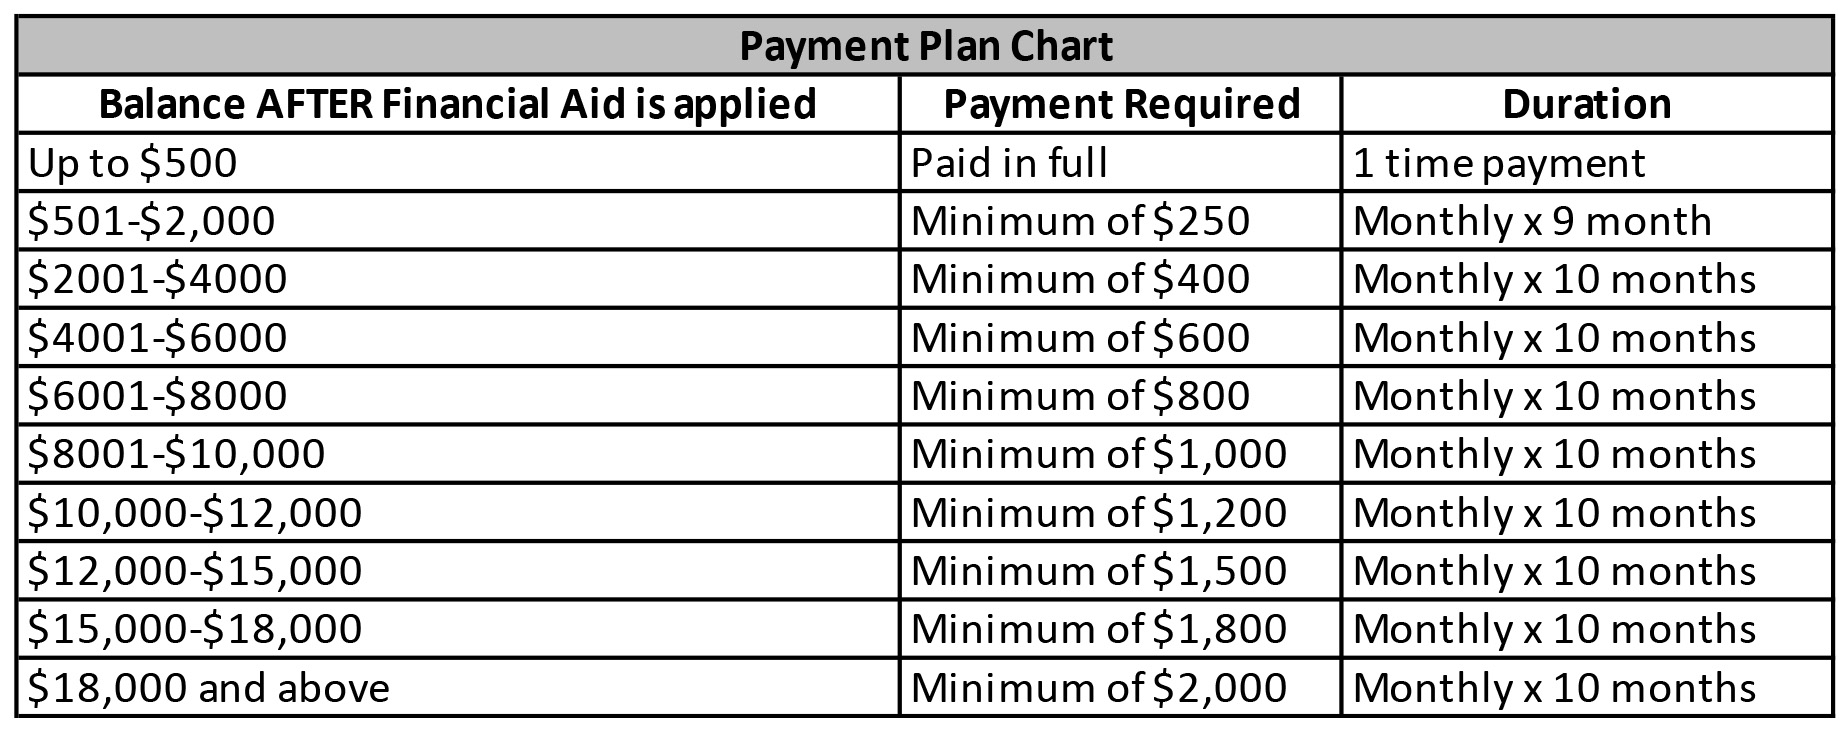 Payment_Plan_Guidelines.jpg